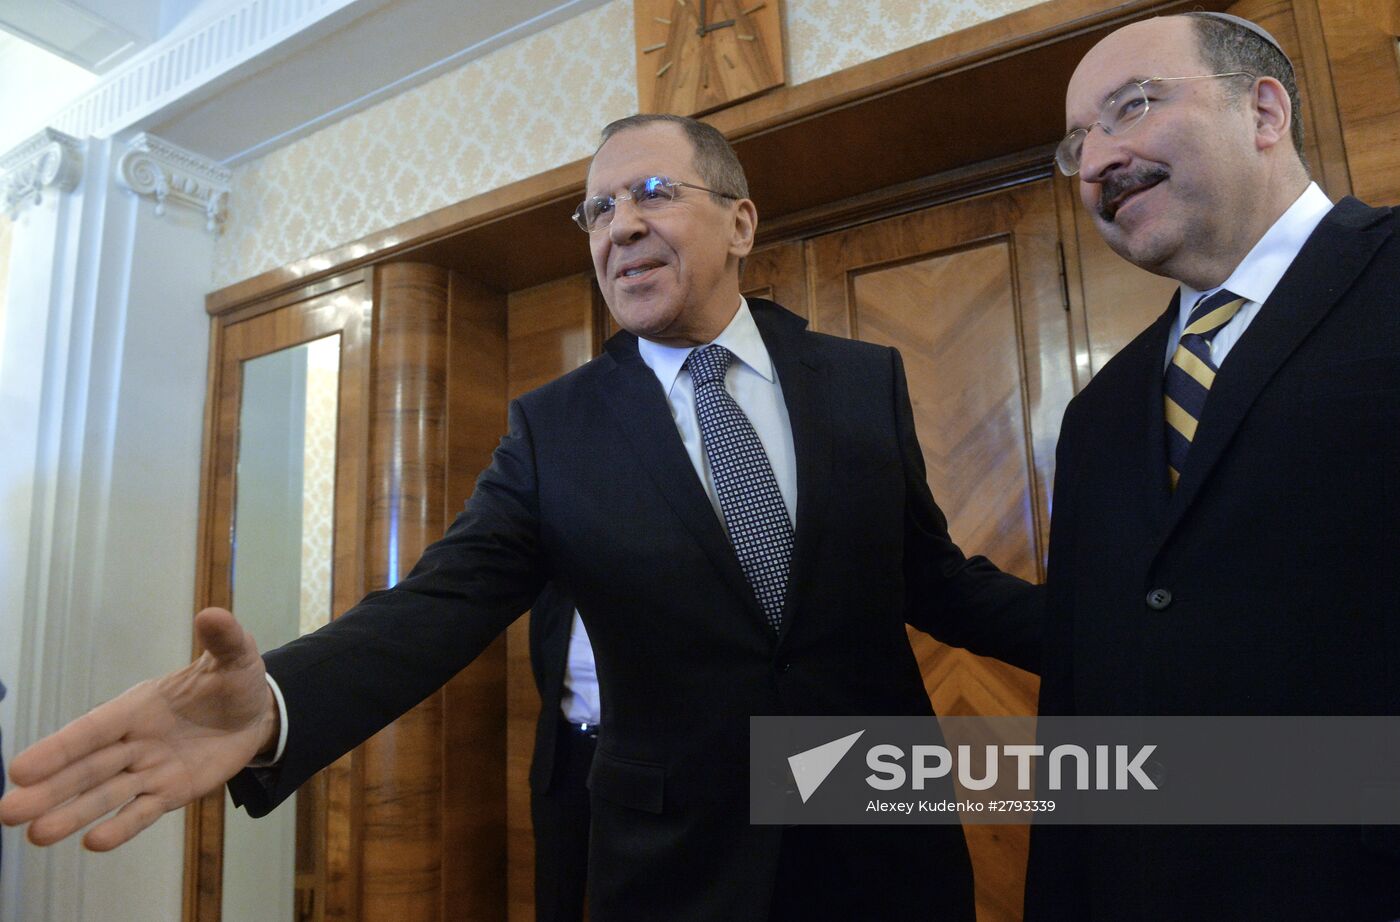 Russian Foreign Minister Sergey Lavrov meets with his Israeli counterpart Dore Gold